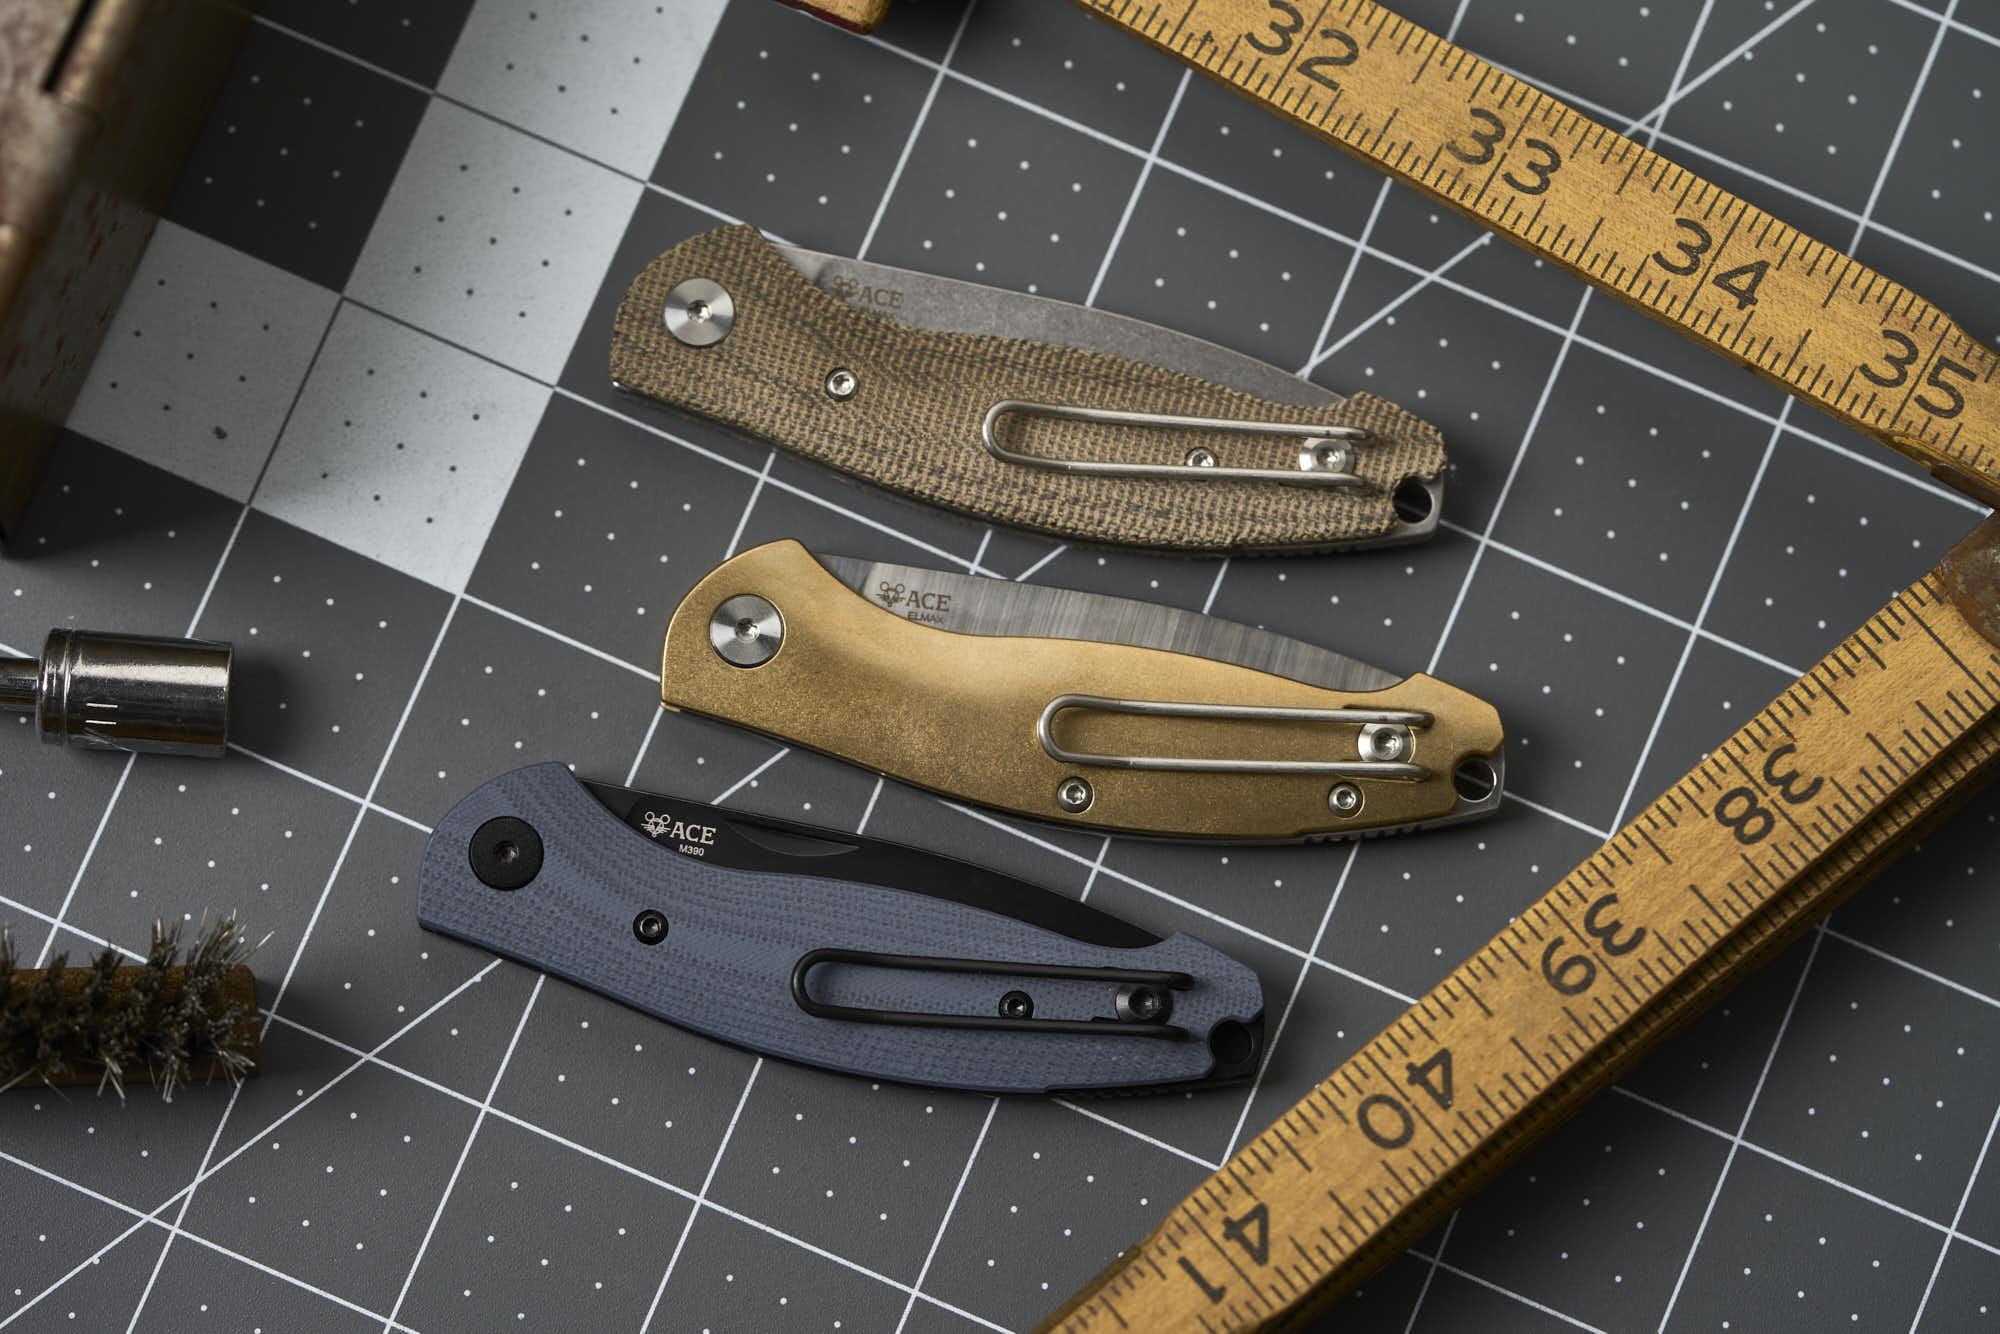 Now In The Shop: Upgrade Your EDC with Giant Mouse Knives & Tools